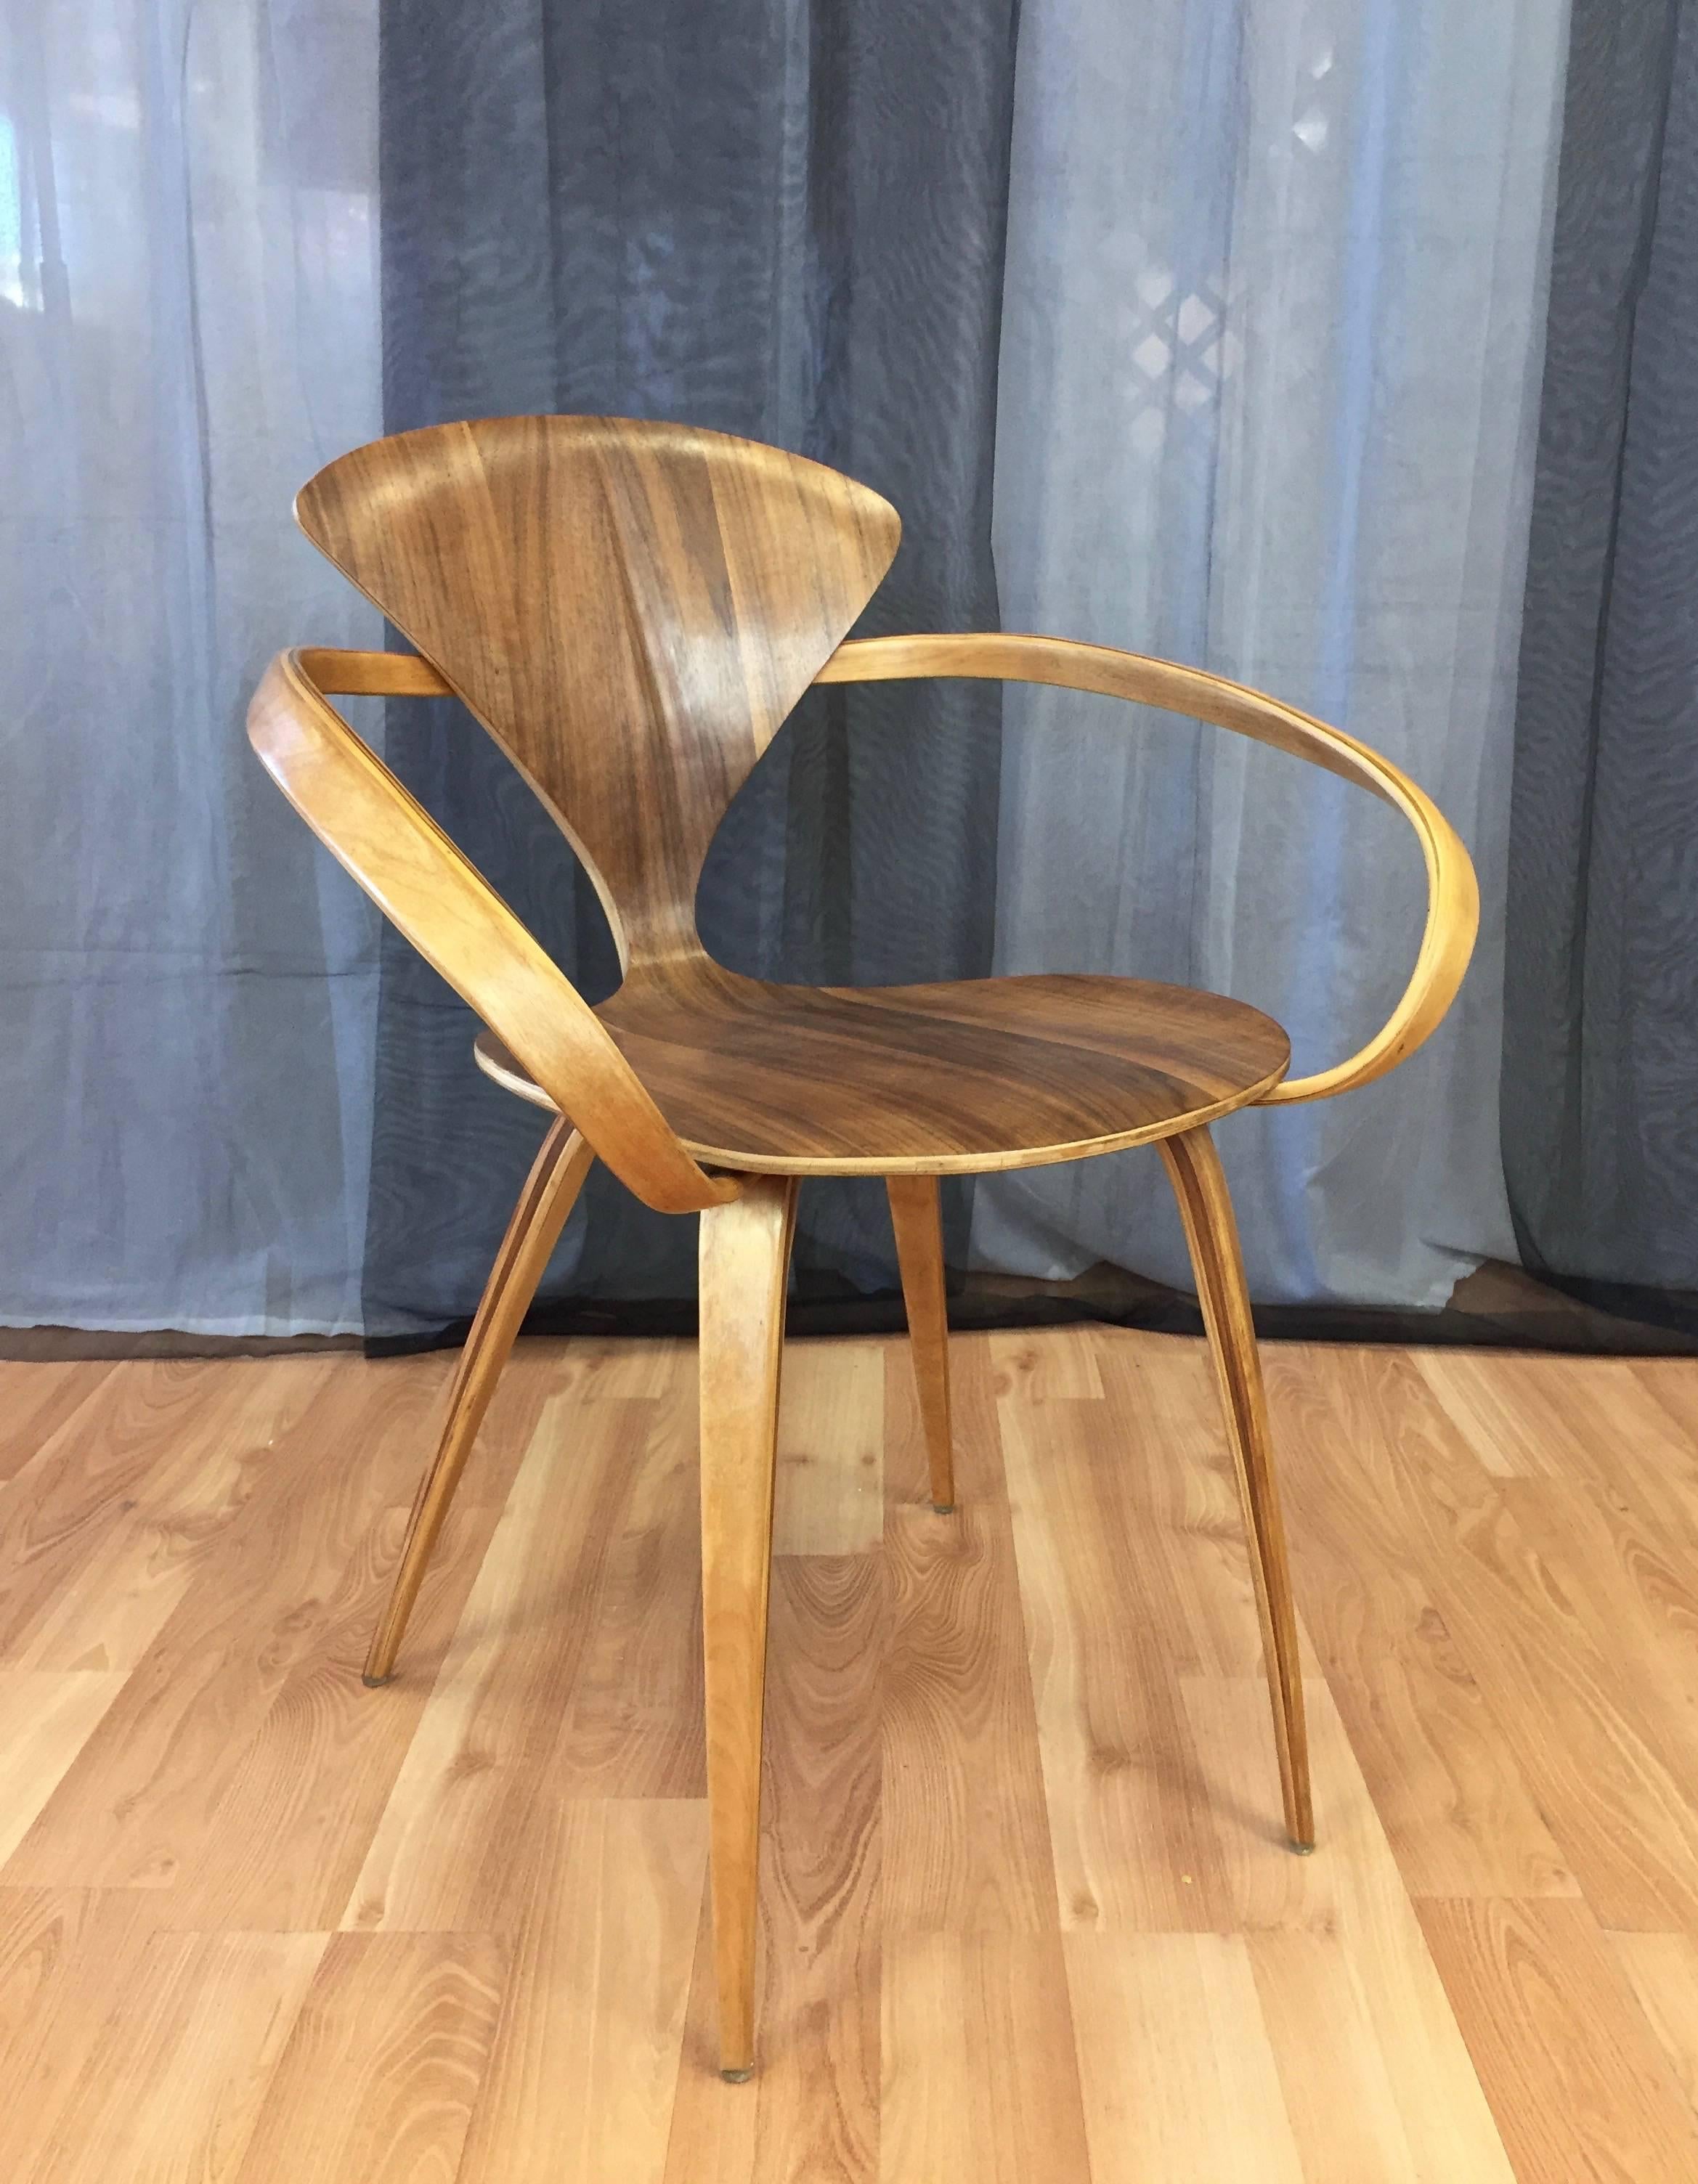 A vintage walnut and birch bentwood armchair or captain’s chair by Norman Cherner for Plycraft.

A Mid-Century Modern design icon commonly referred to as the “Pretzel” chair, its fluid form features walnut veneer laminated plywood that varies in